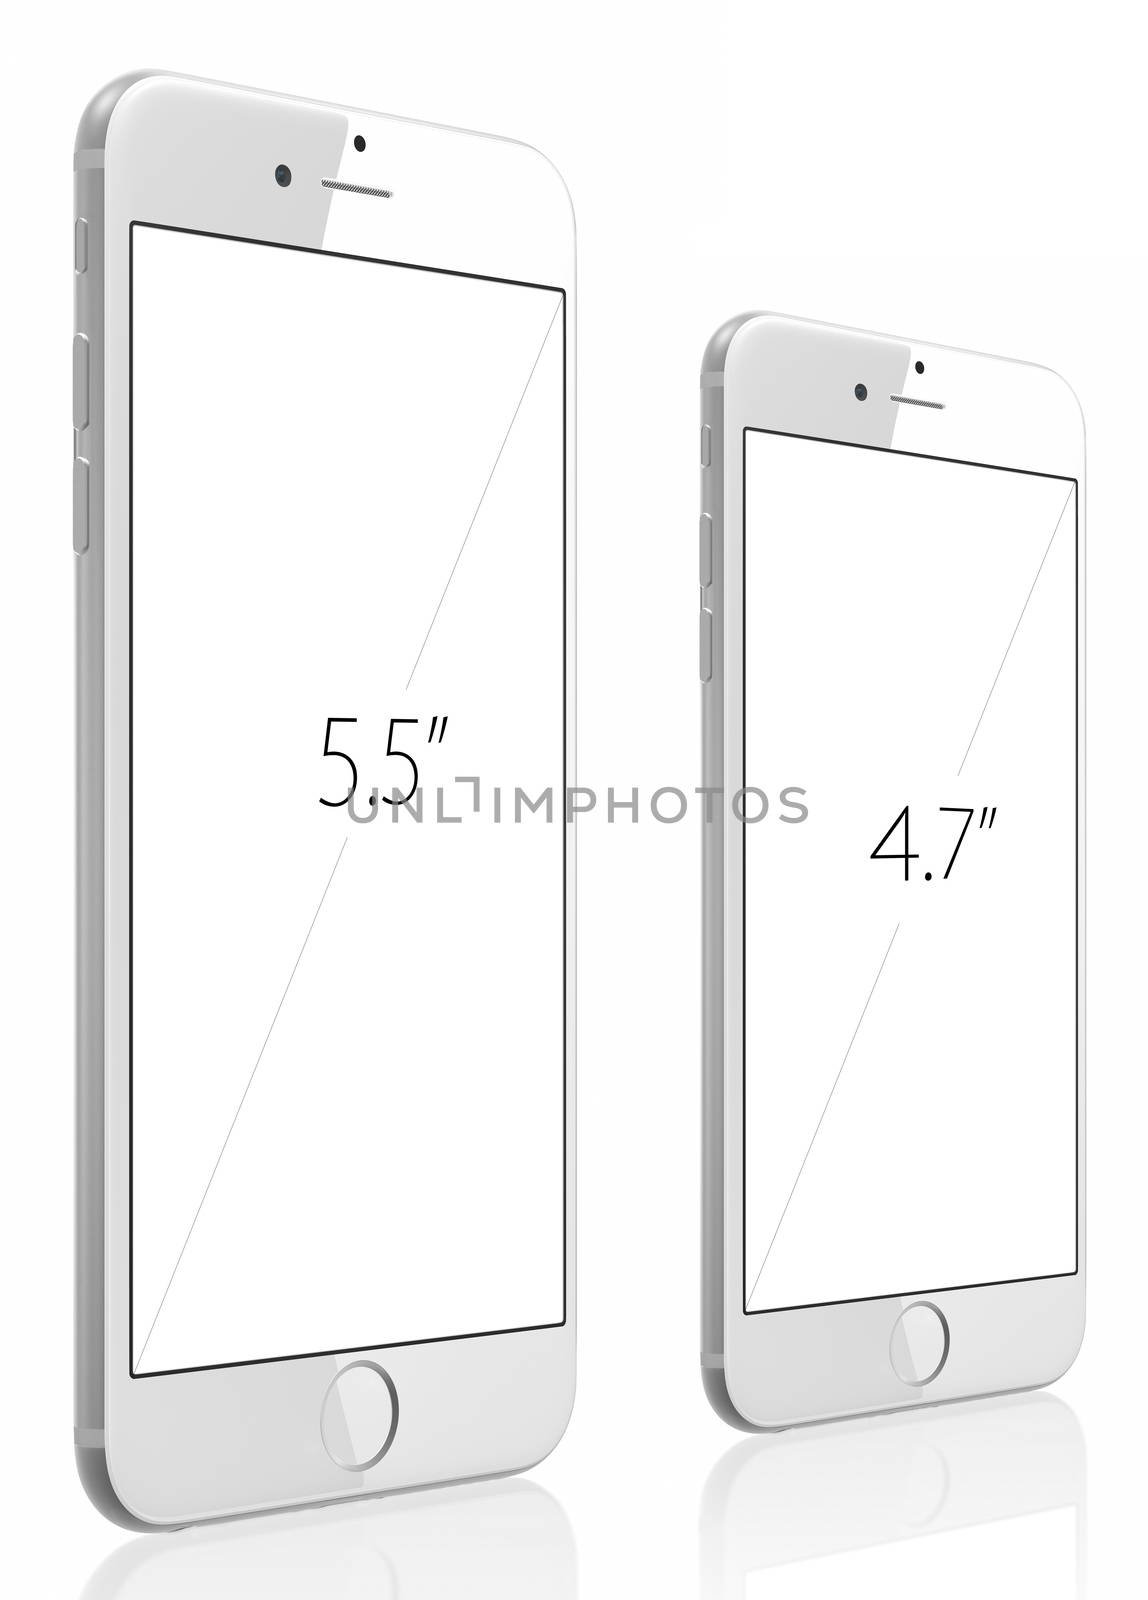 Apple Silver iPhone 6 Plus and iPhone 6 by manaemedia